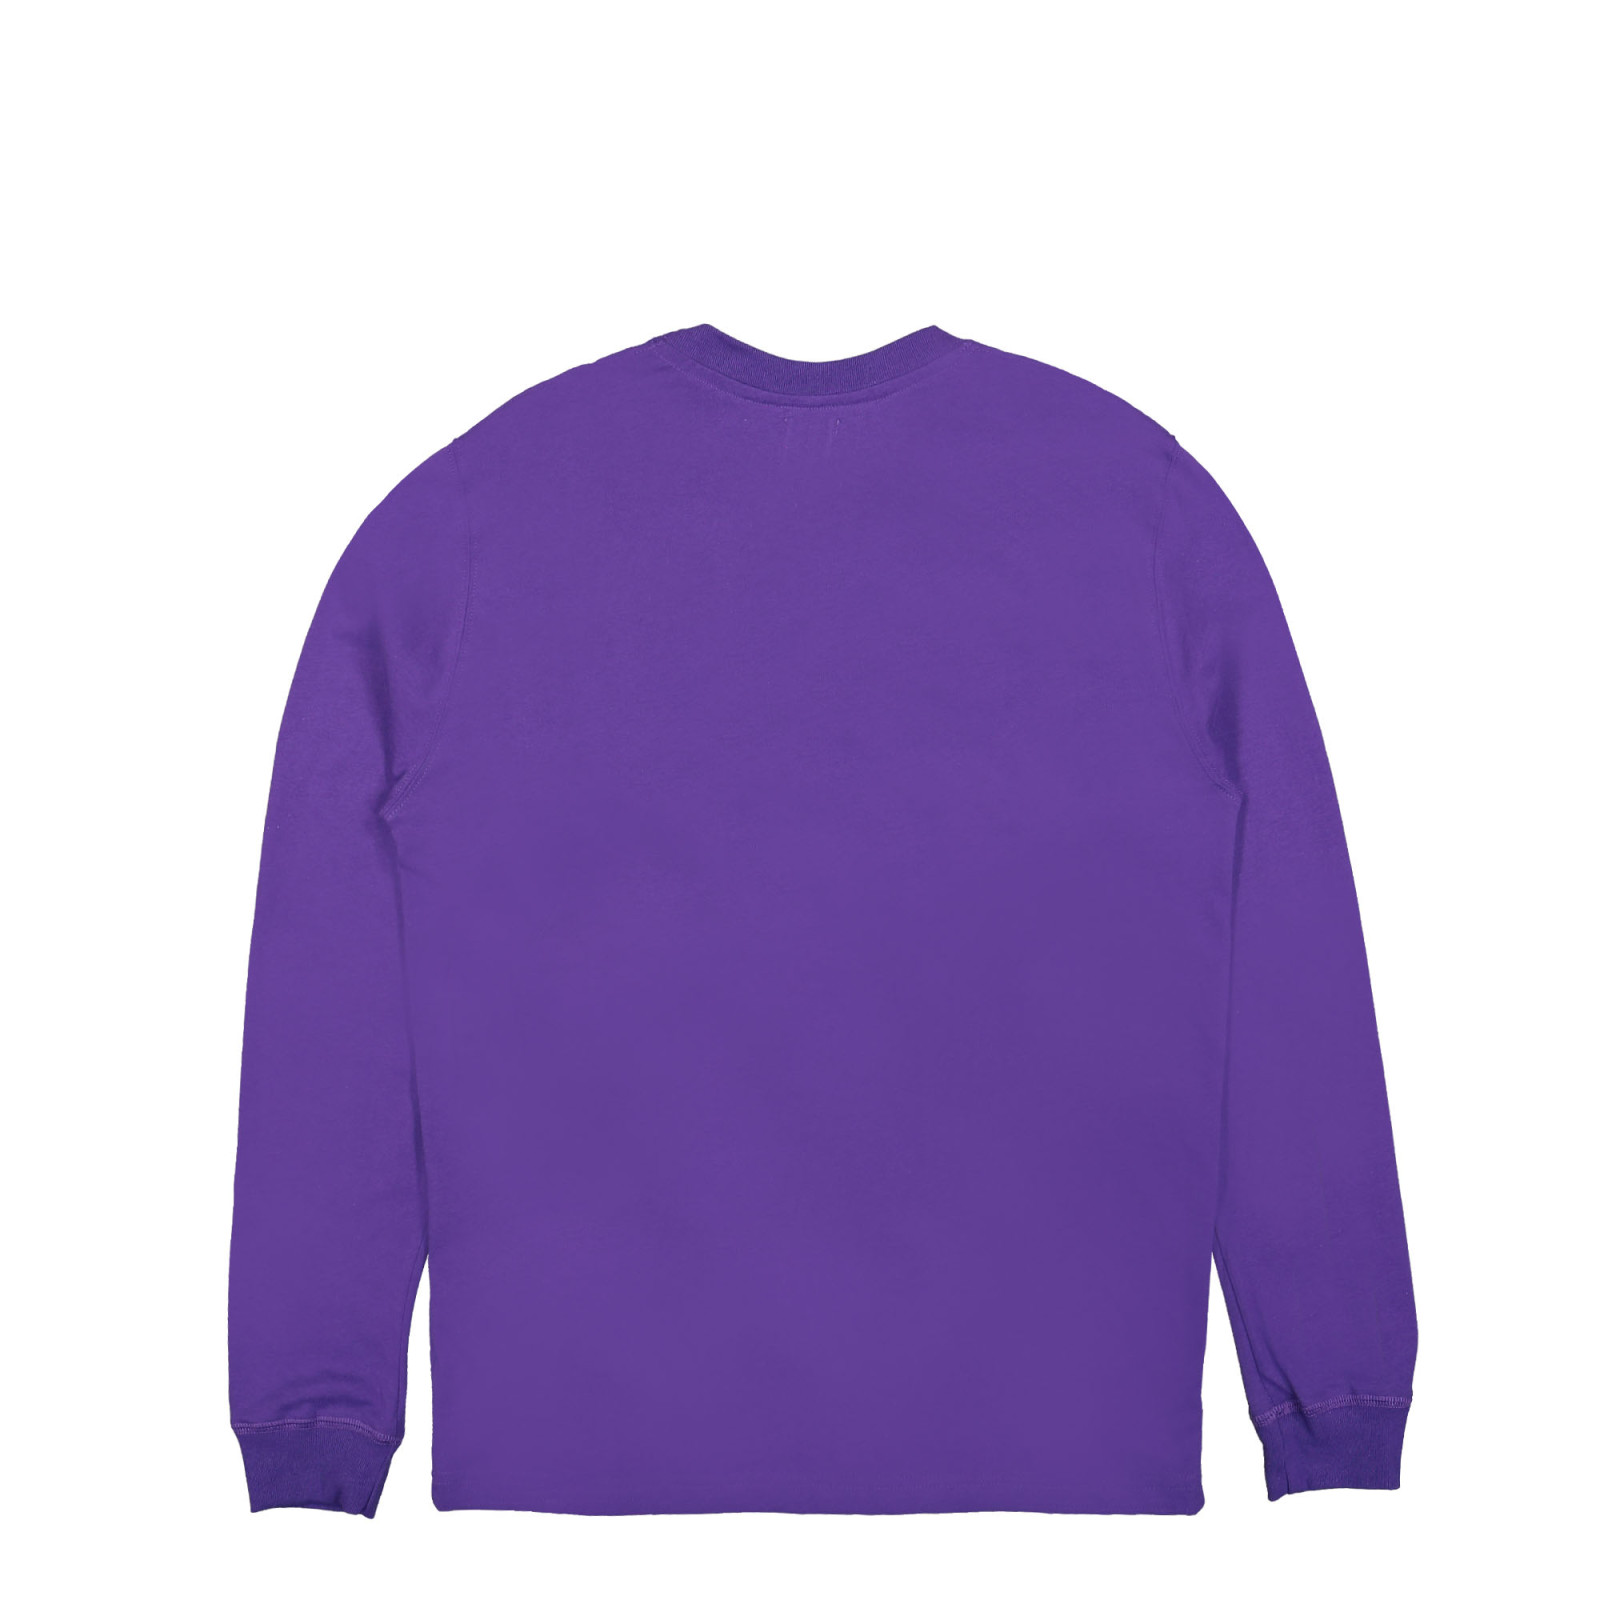 New Balance Made In USA
Core LS Tee
Prism Purple